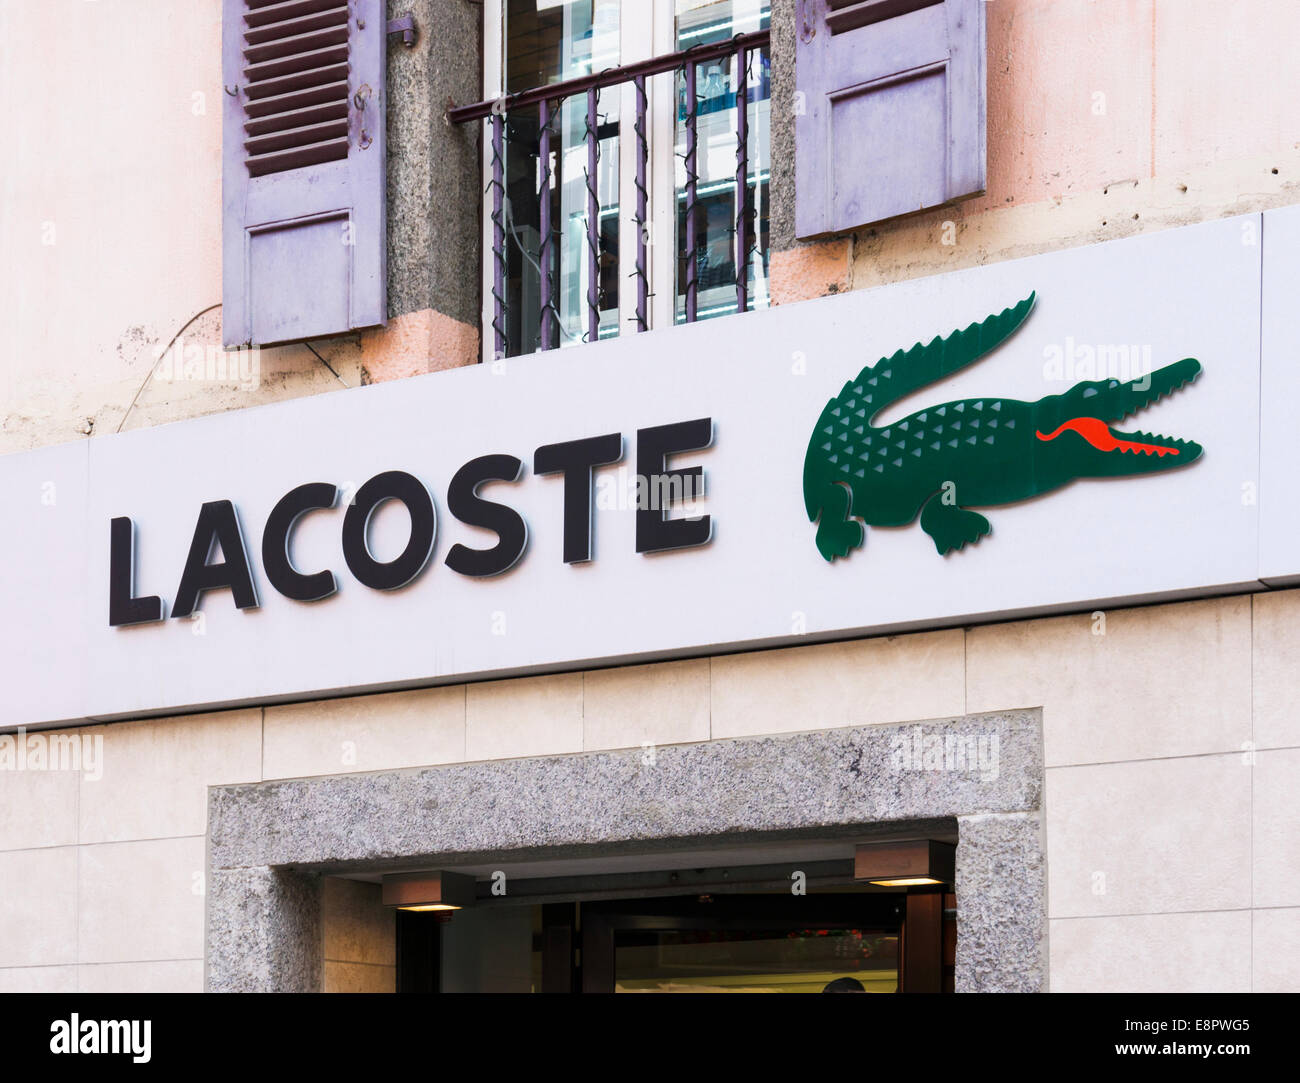 Lacoste store logo on a shop in France, Europe Stock Photo - Alamy